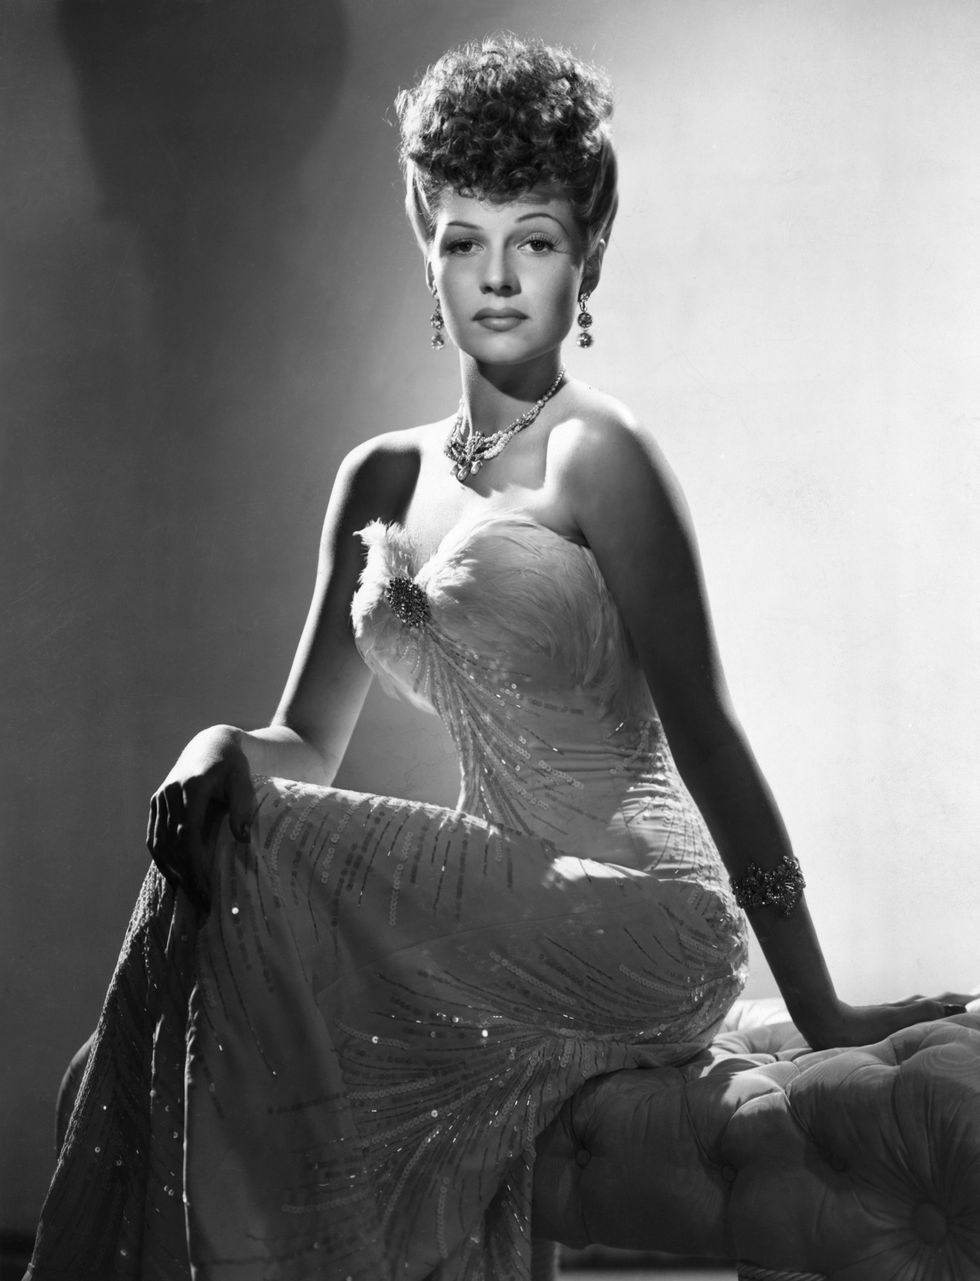 rita hayworth sits on a cushioned stool and looks at the camera, she wears a strapless glittery gown with a necklace and dangling earrings